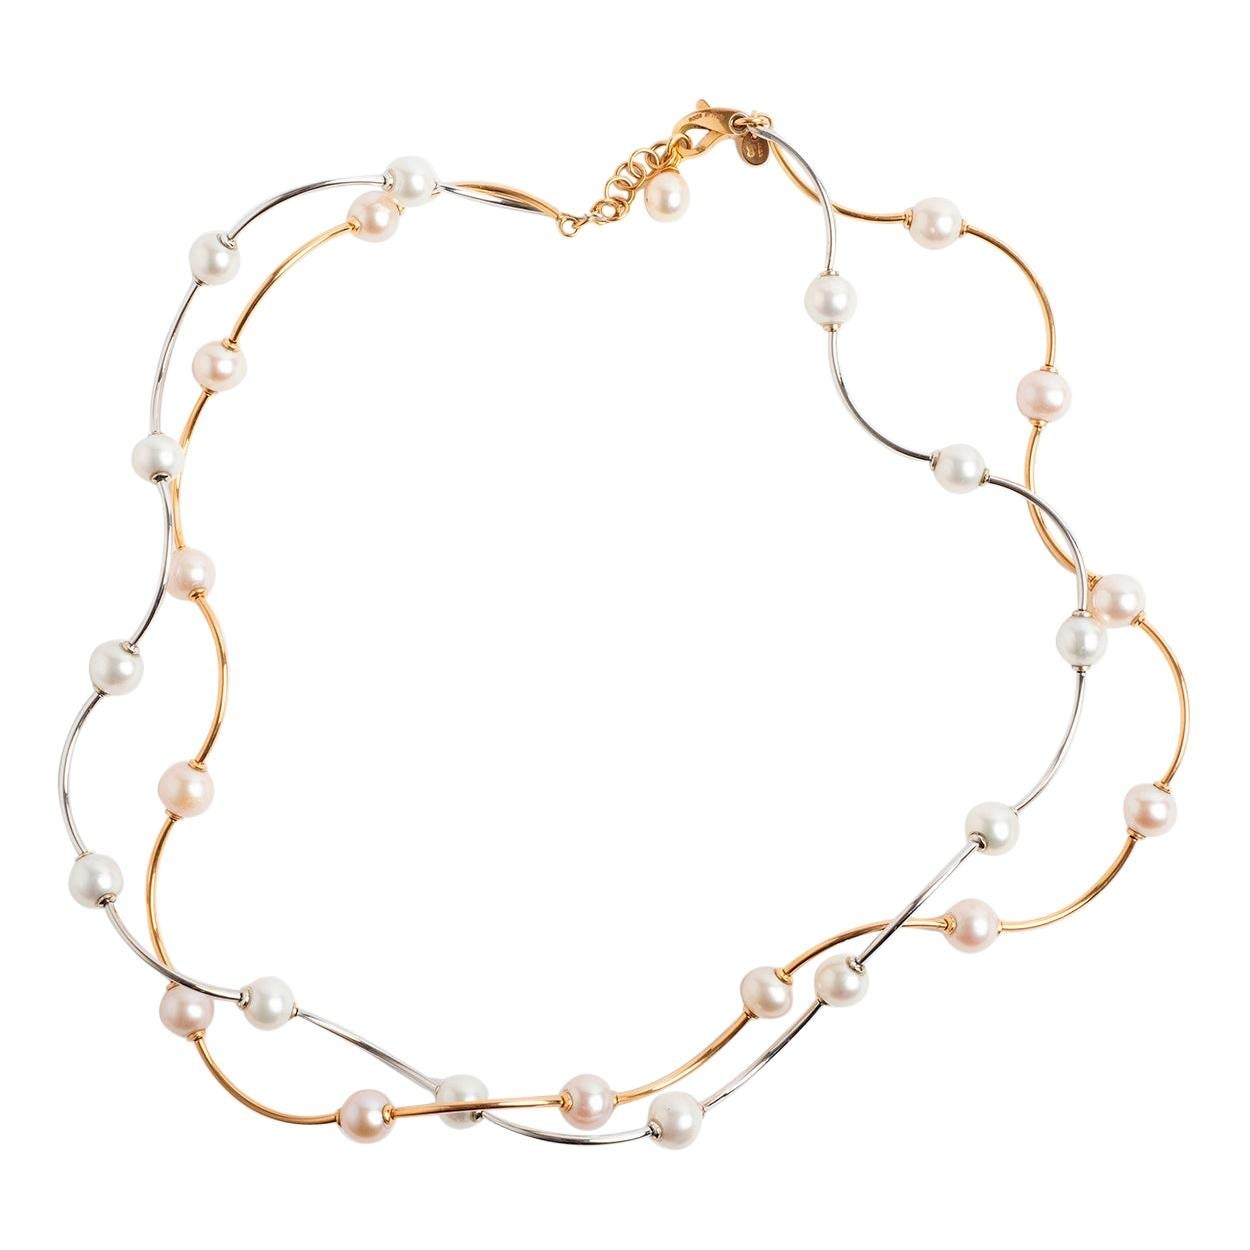 Elaine Firenze Twisted Double Pearl Necklace, 18 Carat Rose & White Gold. For Sale